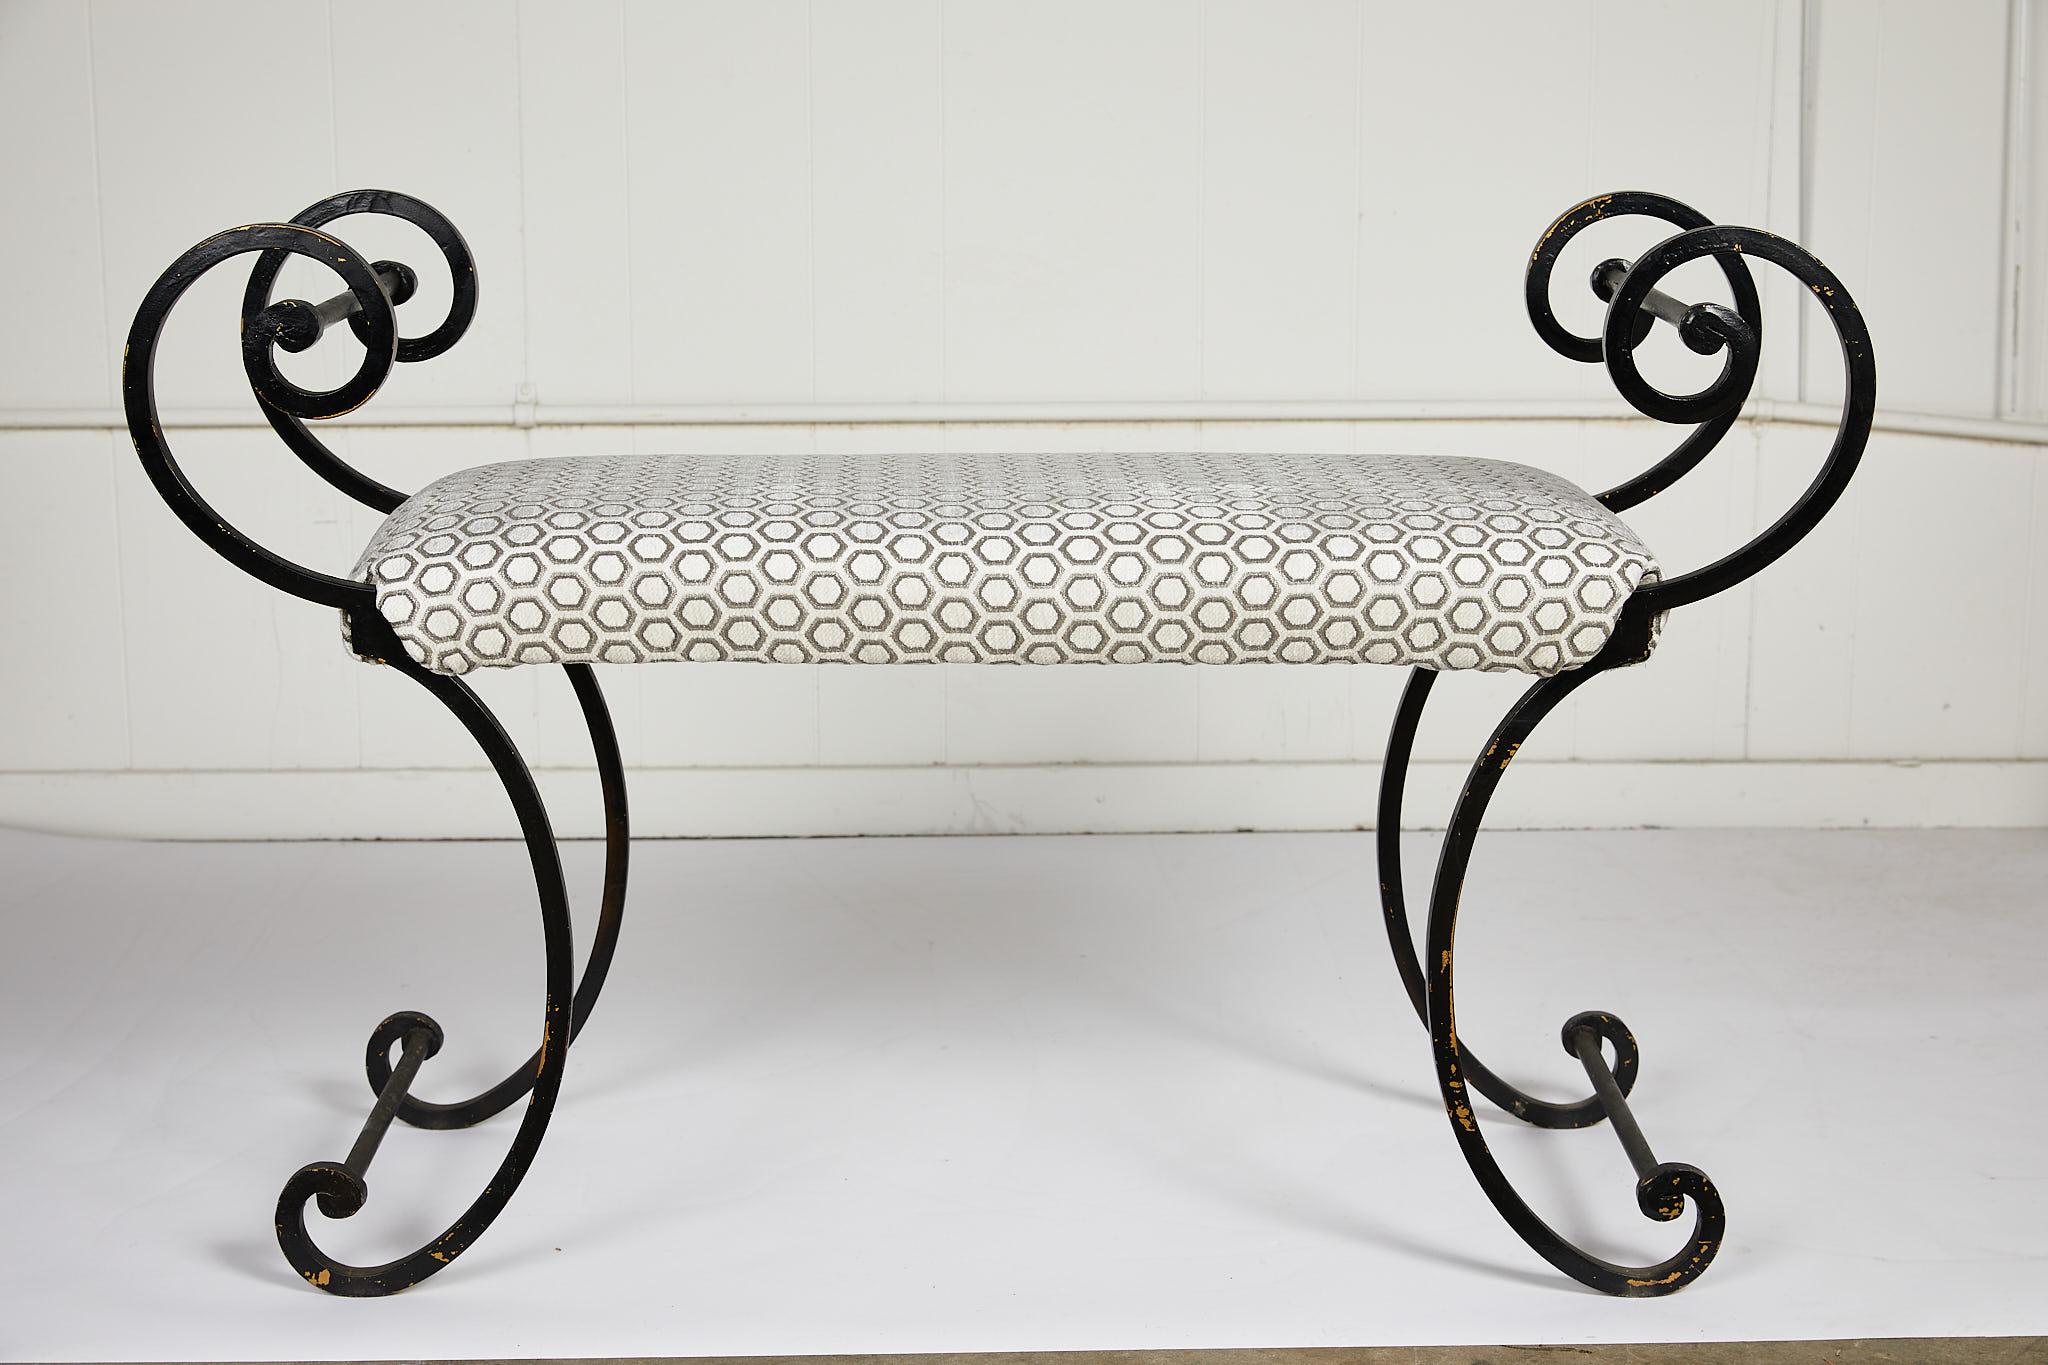 Late 20th century Hollywood Regency style iron bench with elegant scrolling arms and legs supporting an upholstered seat covered in intara ivory by Jim Thompson Fabrics.